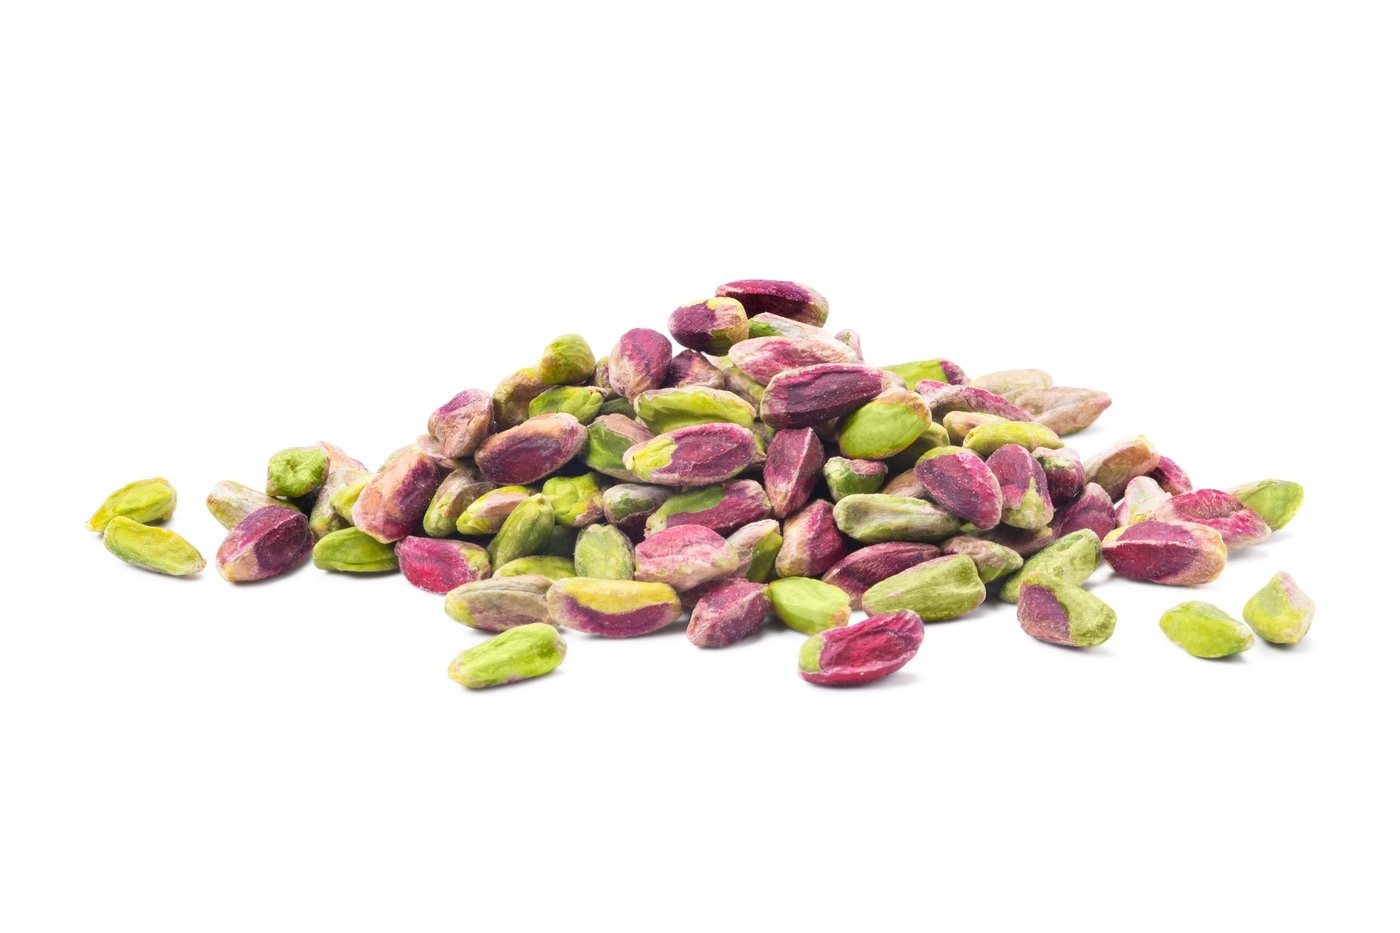 Turkish Pistachios (Raw, No Shell) image zoom